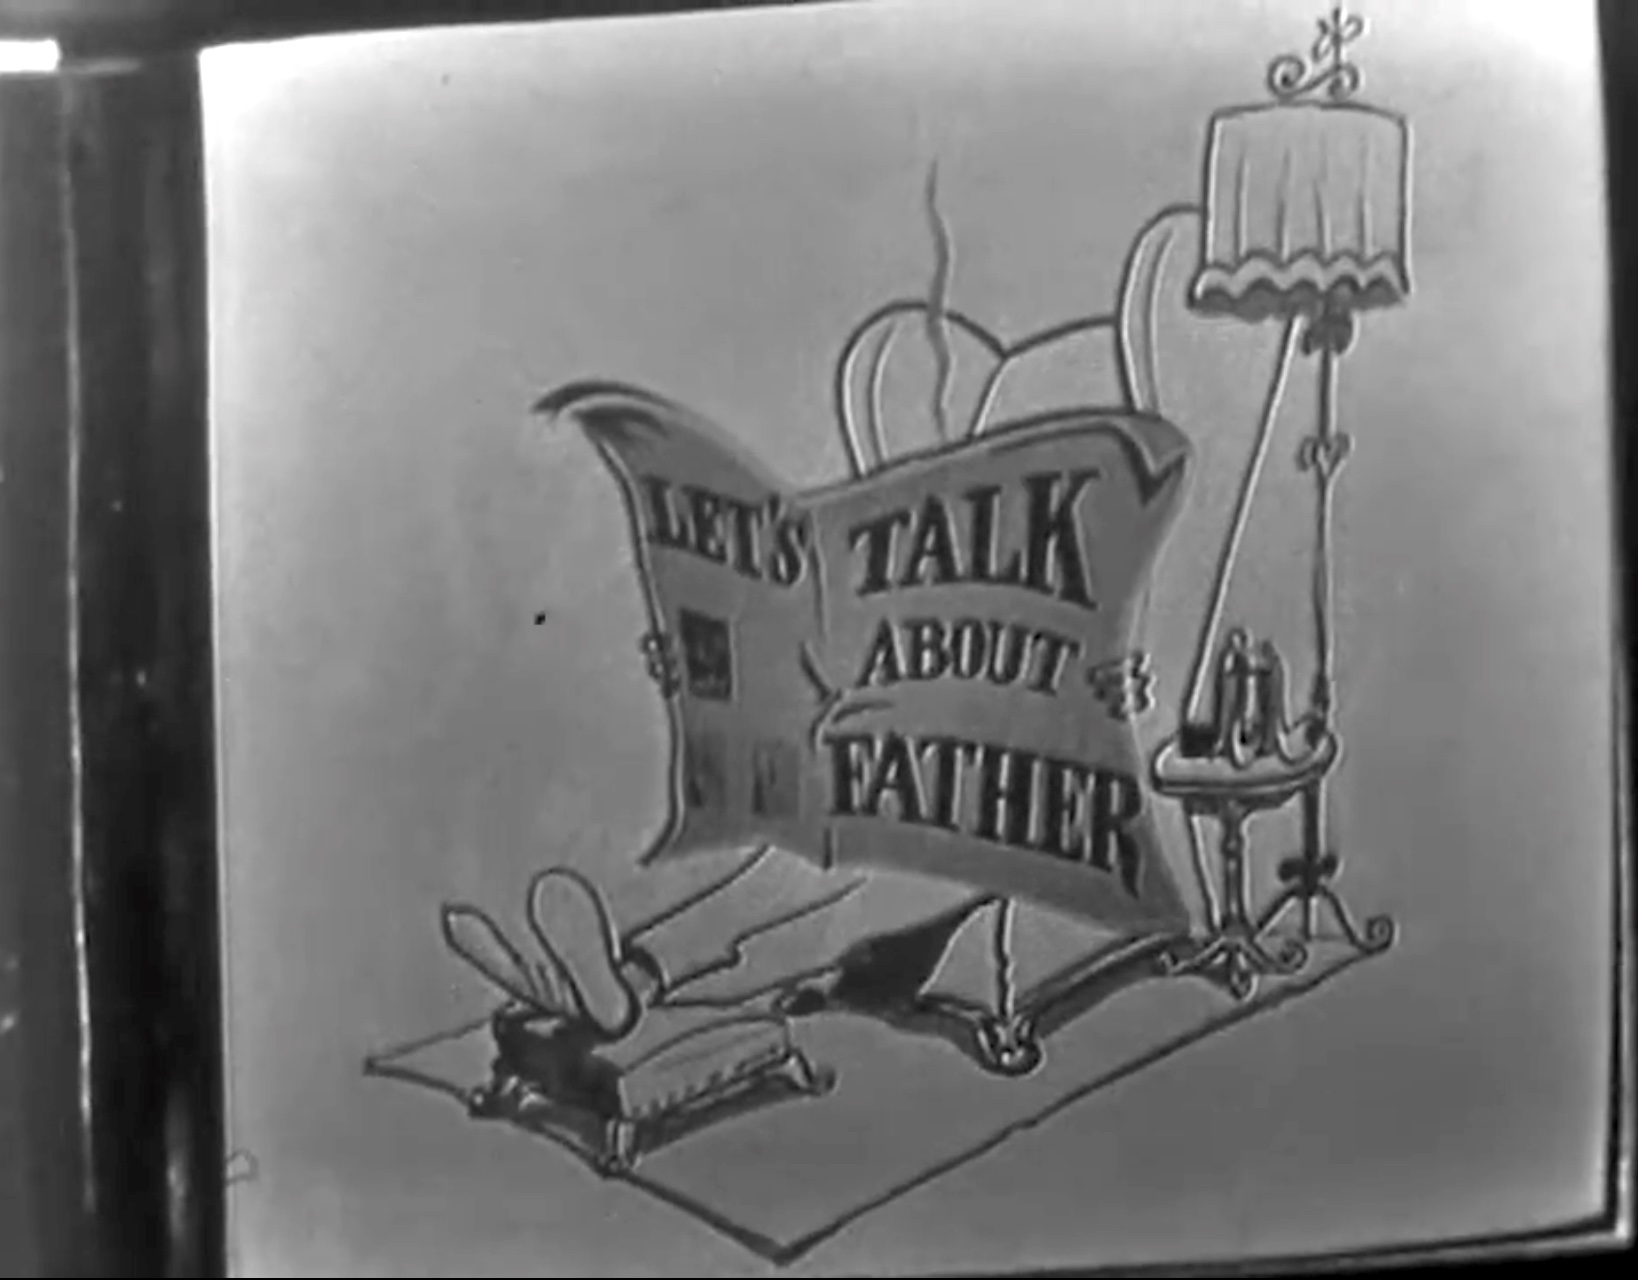 Let's Talk About Father - The Red Skelton Show, season 1